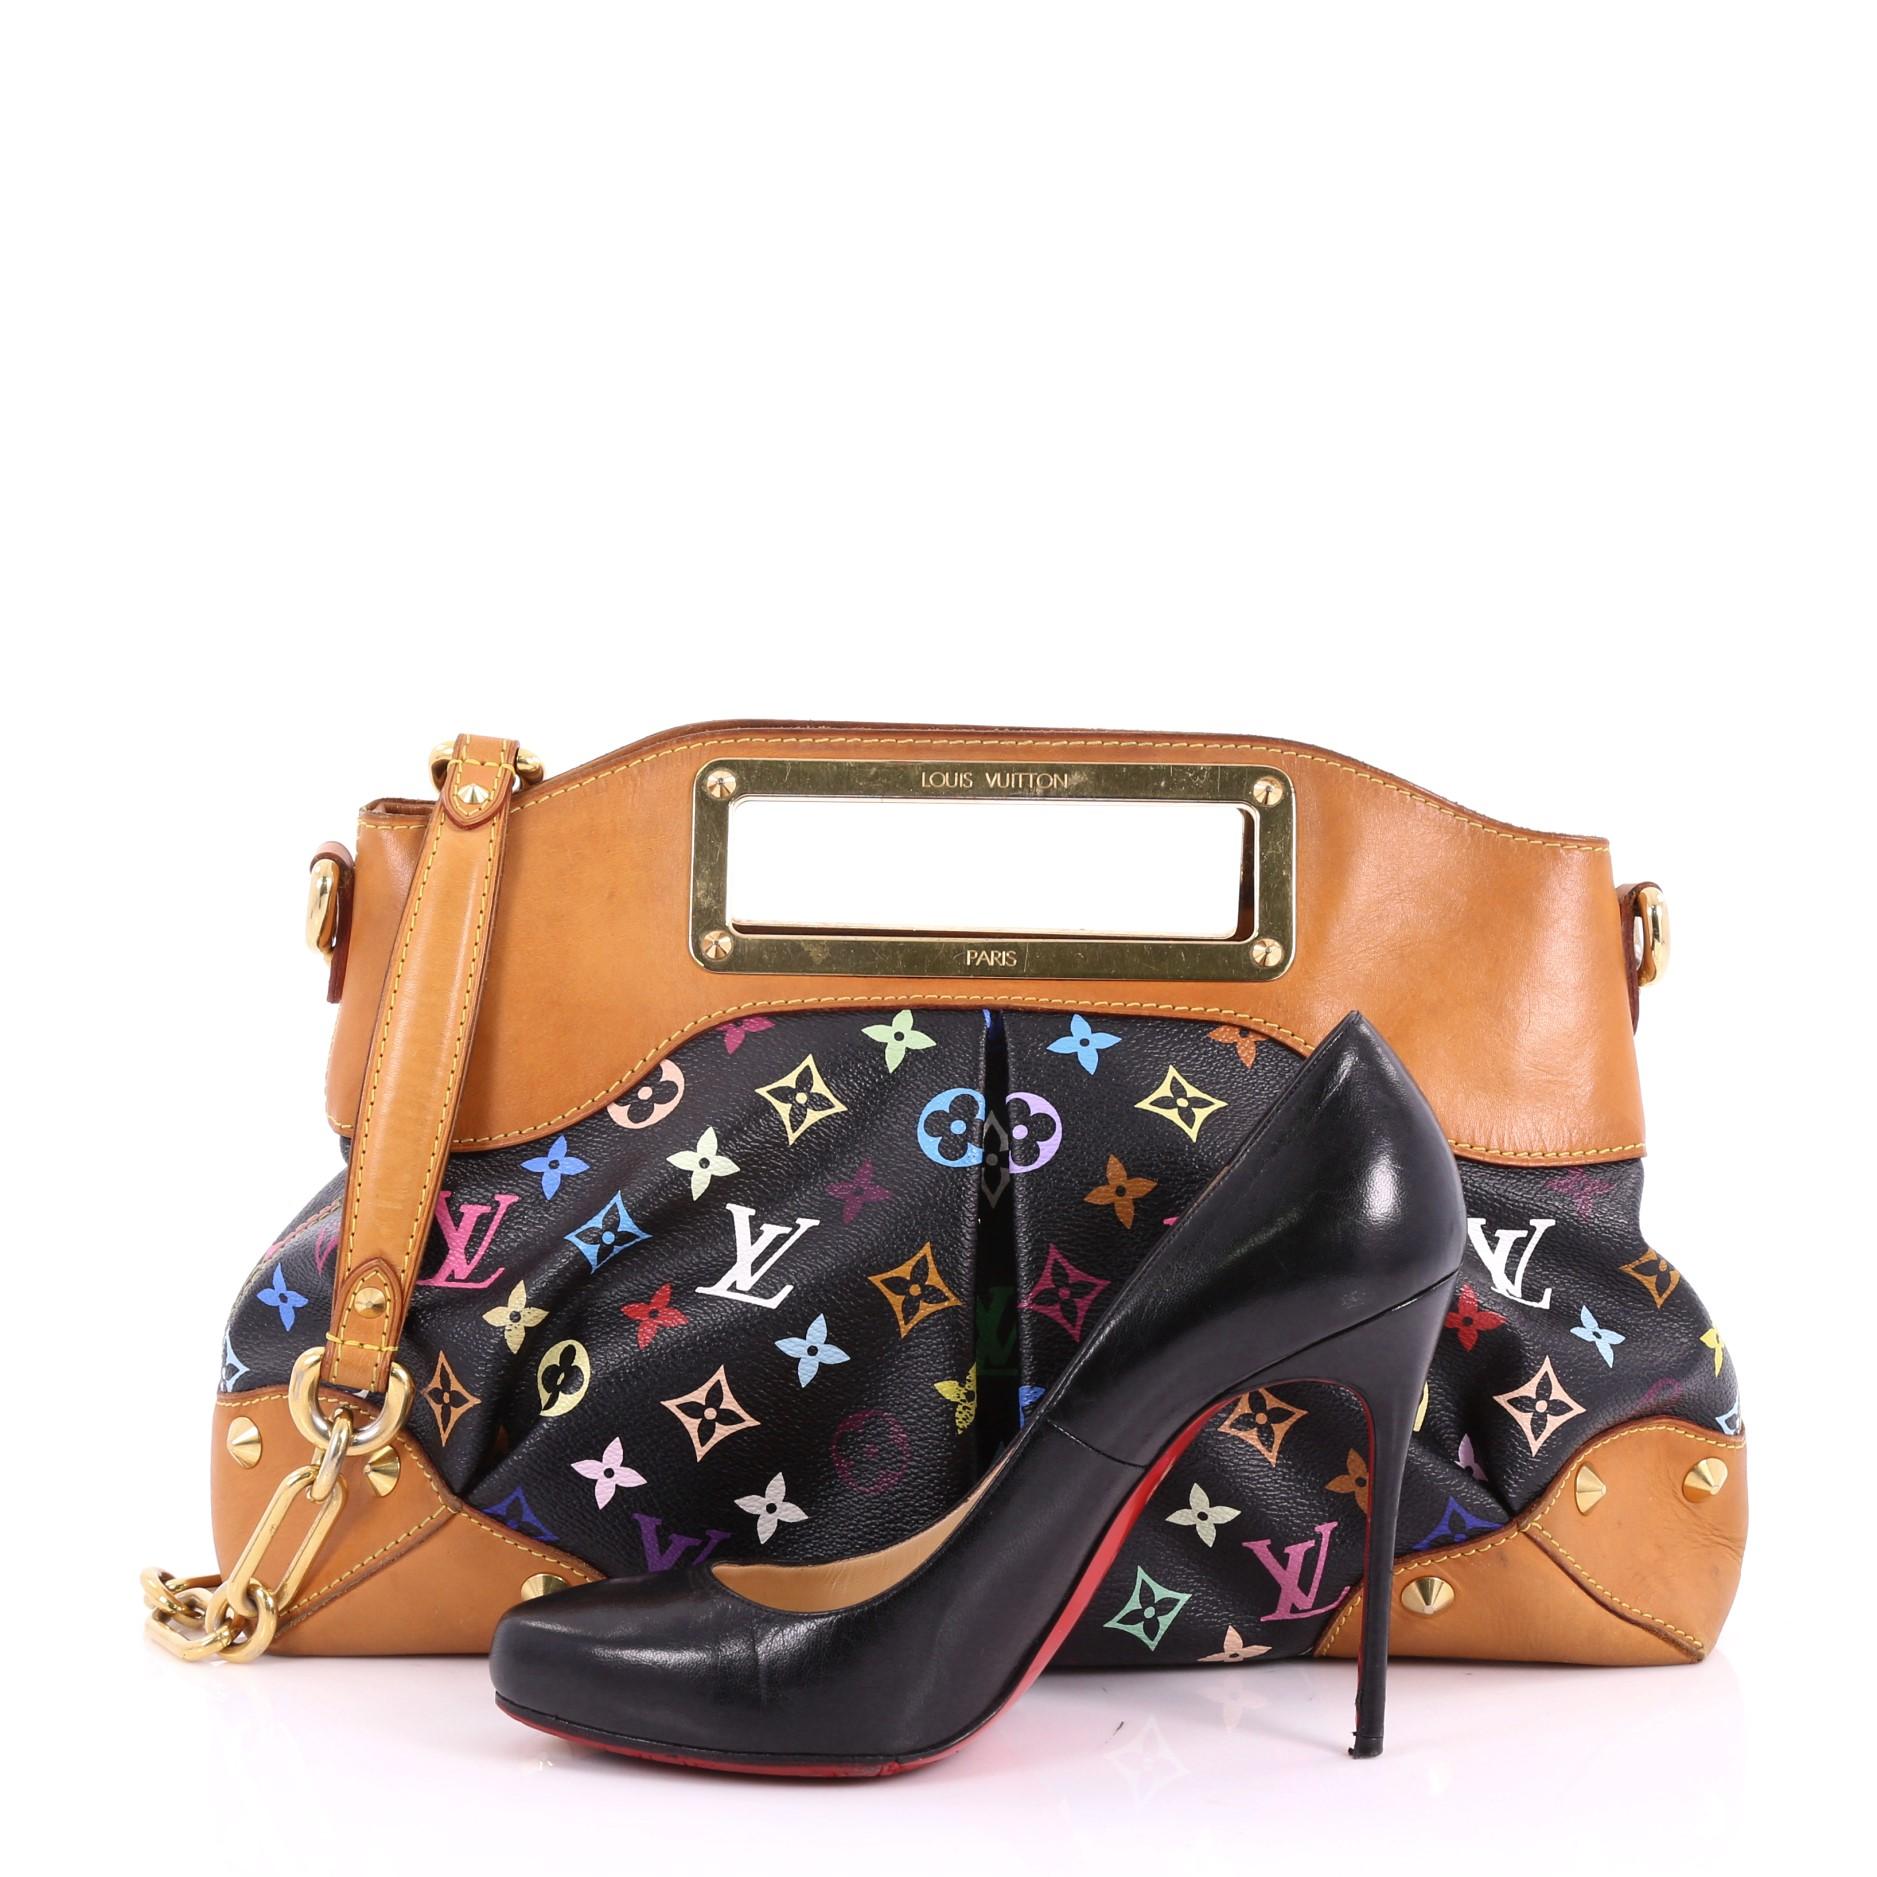 This authentic Louis Vuitton Judy Handbag Monogram Multicolor MM is a vibrant and colorful bag perfect for everyday. Featuring Takashi Murakami's popular black monogram multicolor coated canvas, this pleated feminine bag features a logo engraved